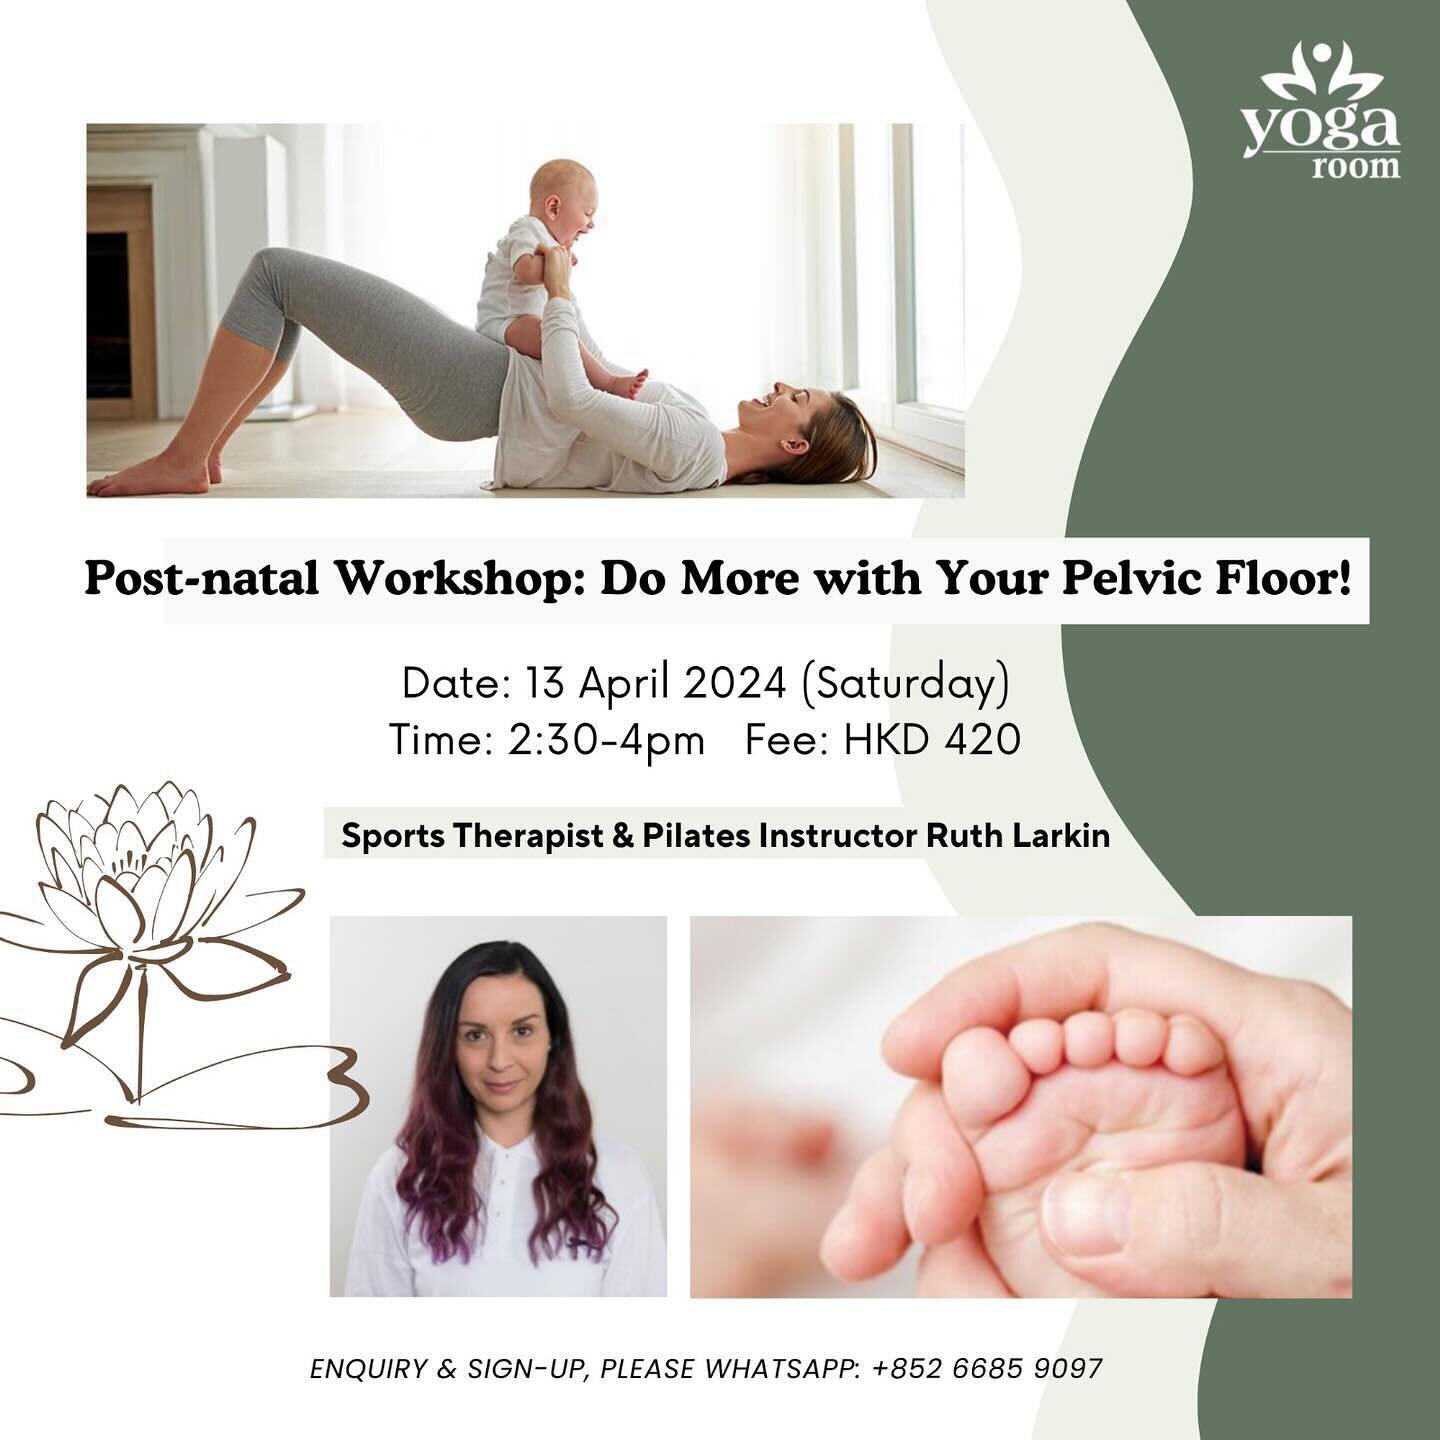 ✨Post-natal Workshop🤰🏻
Do More with Your Pelvic Floor with Ruth Larkin✨
@rlsportstherapy 

⚪️ Date: 13 April 2024 (Saturday)
⚪️ Time: 2:30-4pm
⚪️ Fee: HK$ 420
⚪️ Venue: The Yoga Room, Sheung Wan

If you have ever been pregnant, had abdominal surger